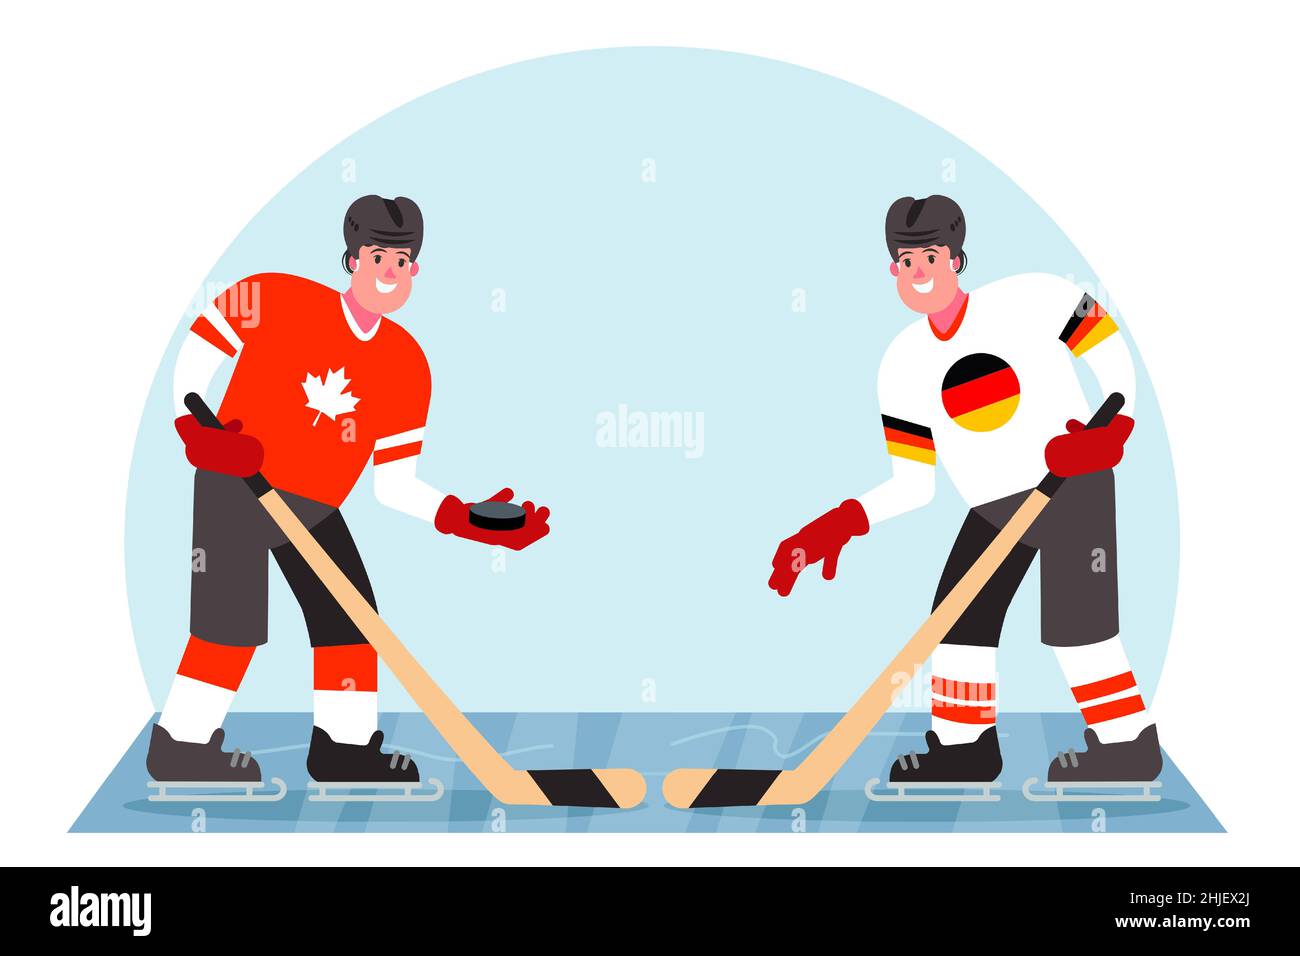 Ice hockey players. Competition between Canada and Germany. Vector illustration in a flat style. Stock Vector